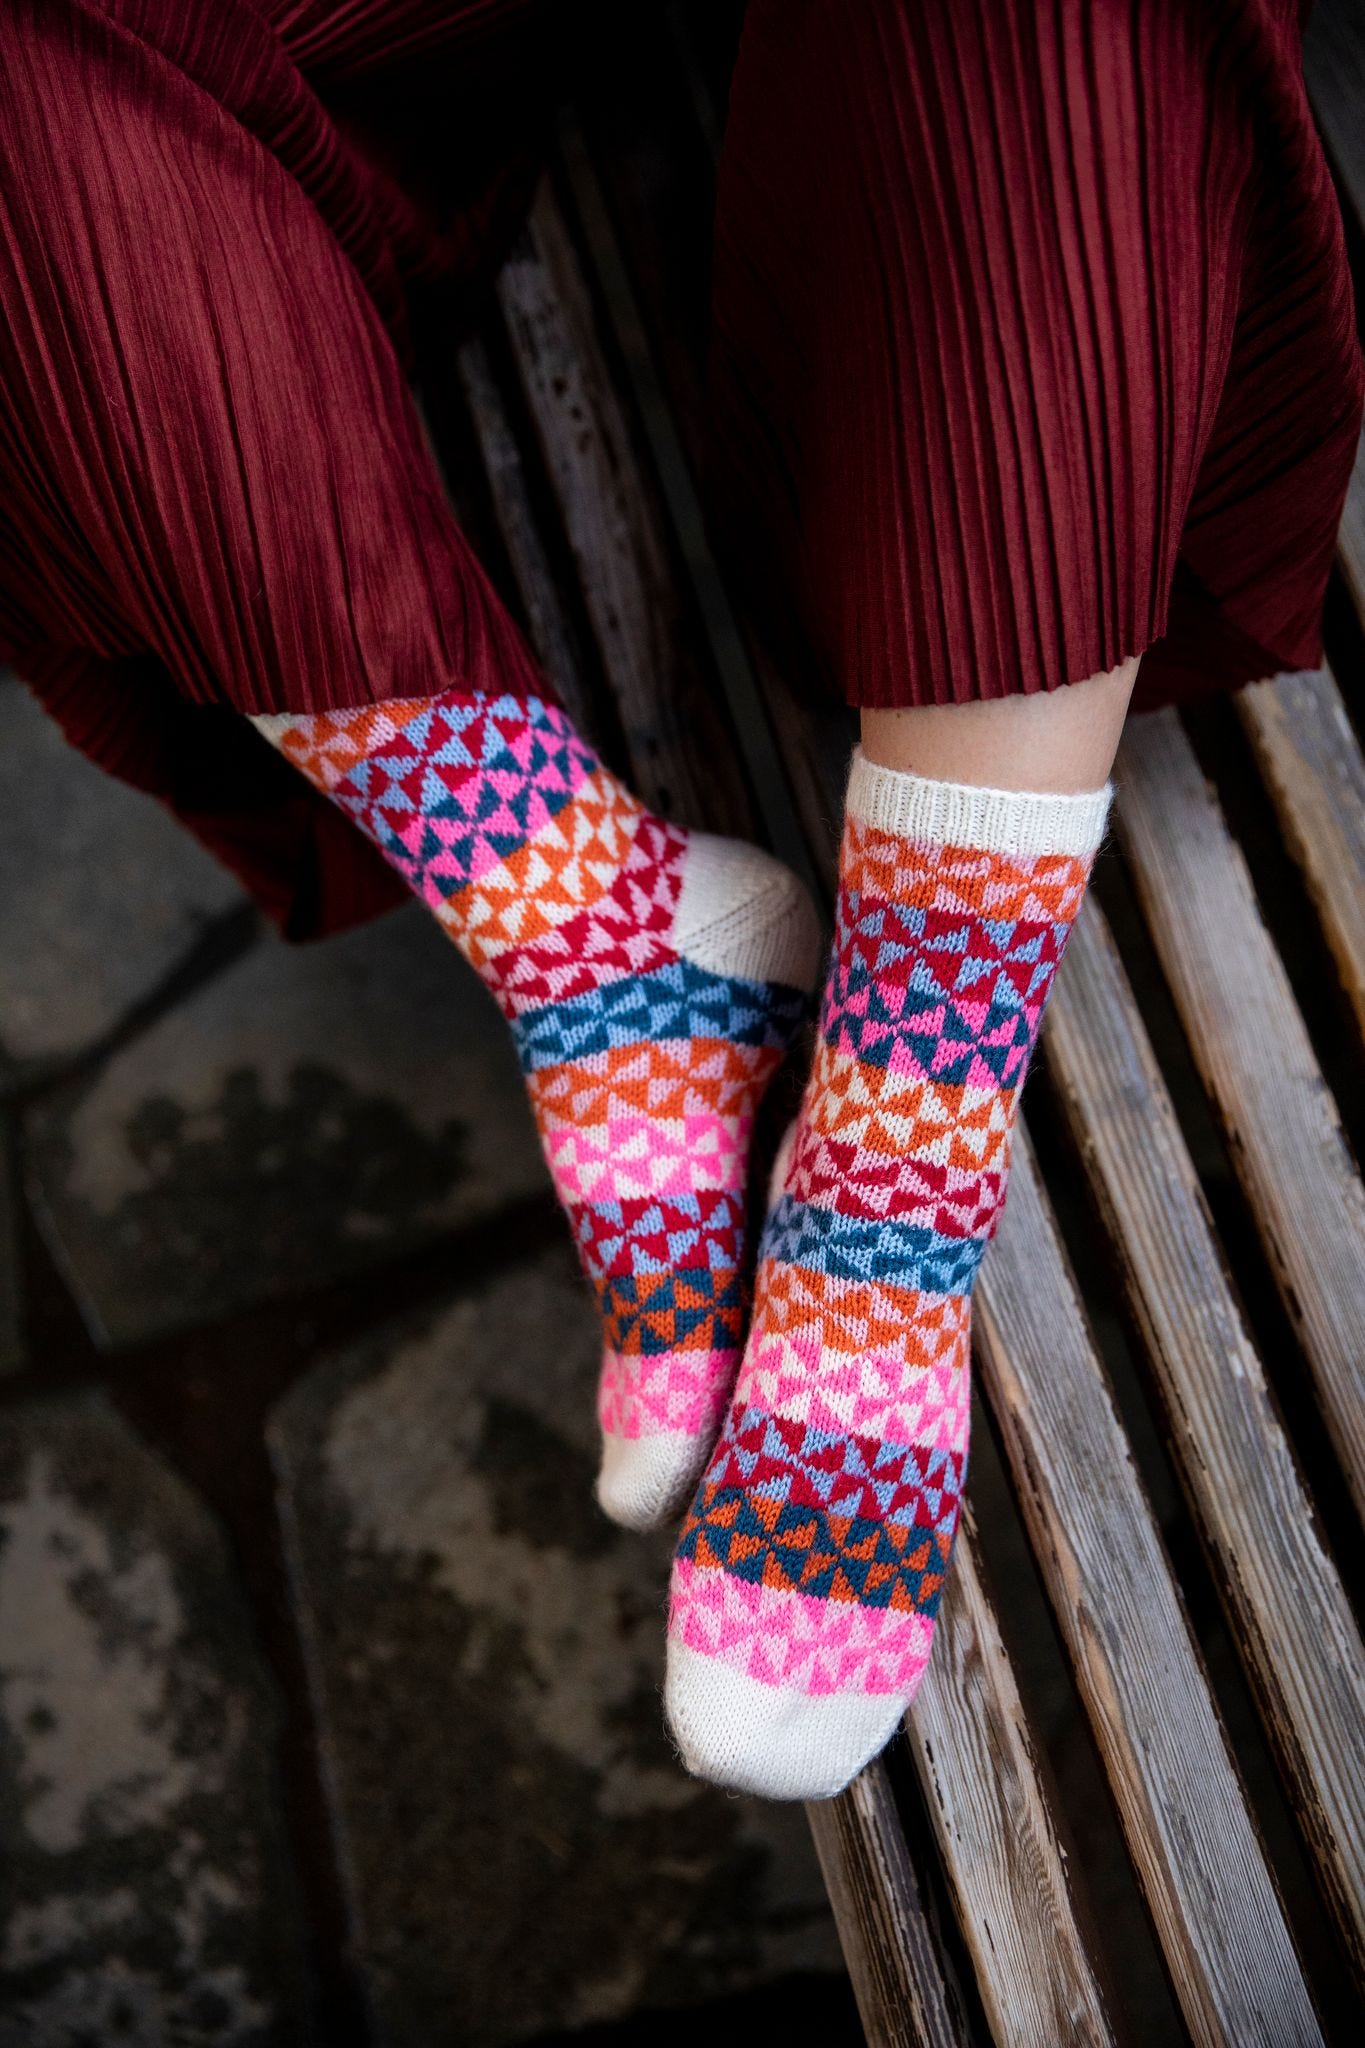 A pair of brightly-colored socks displayed on someone's feet - you can see the side of the right foot and the top of the left, showing off a multi-colored design that might remind the viewer of foil pinwheels